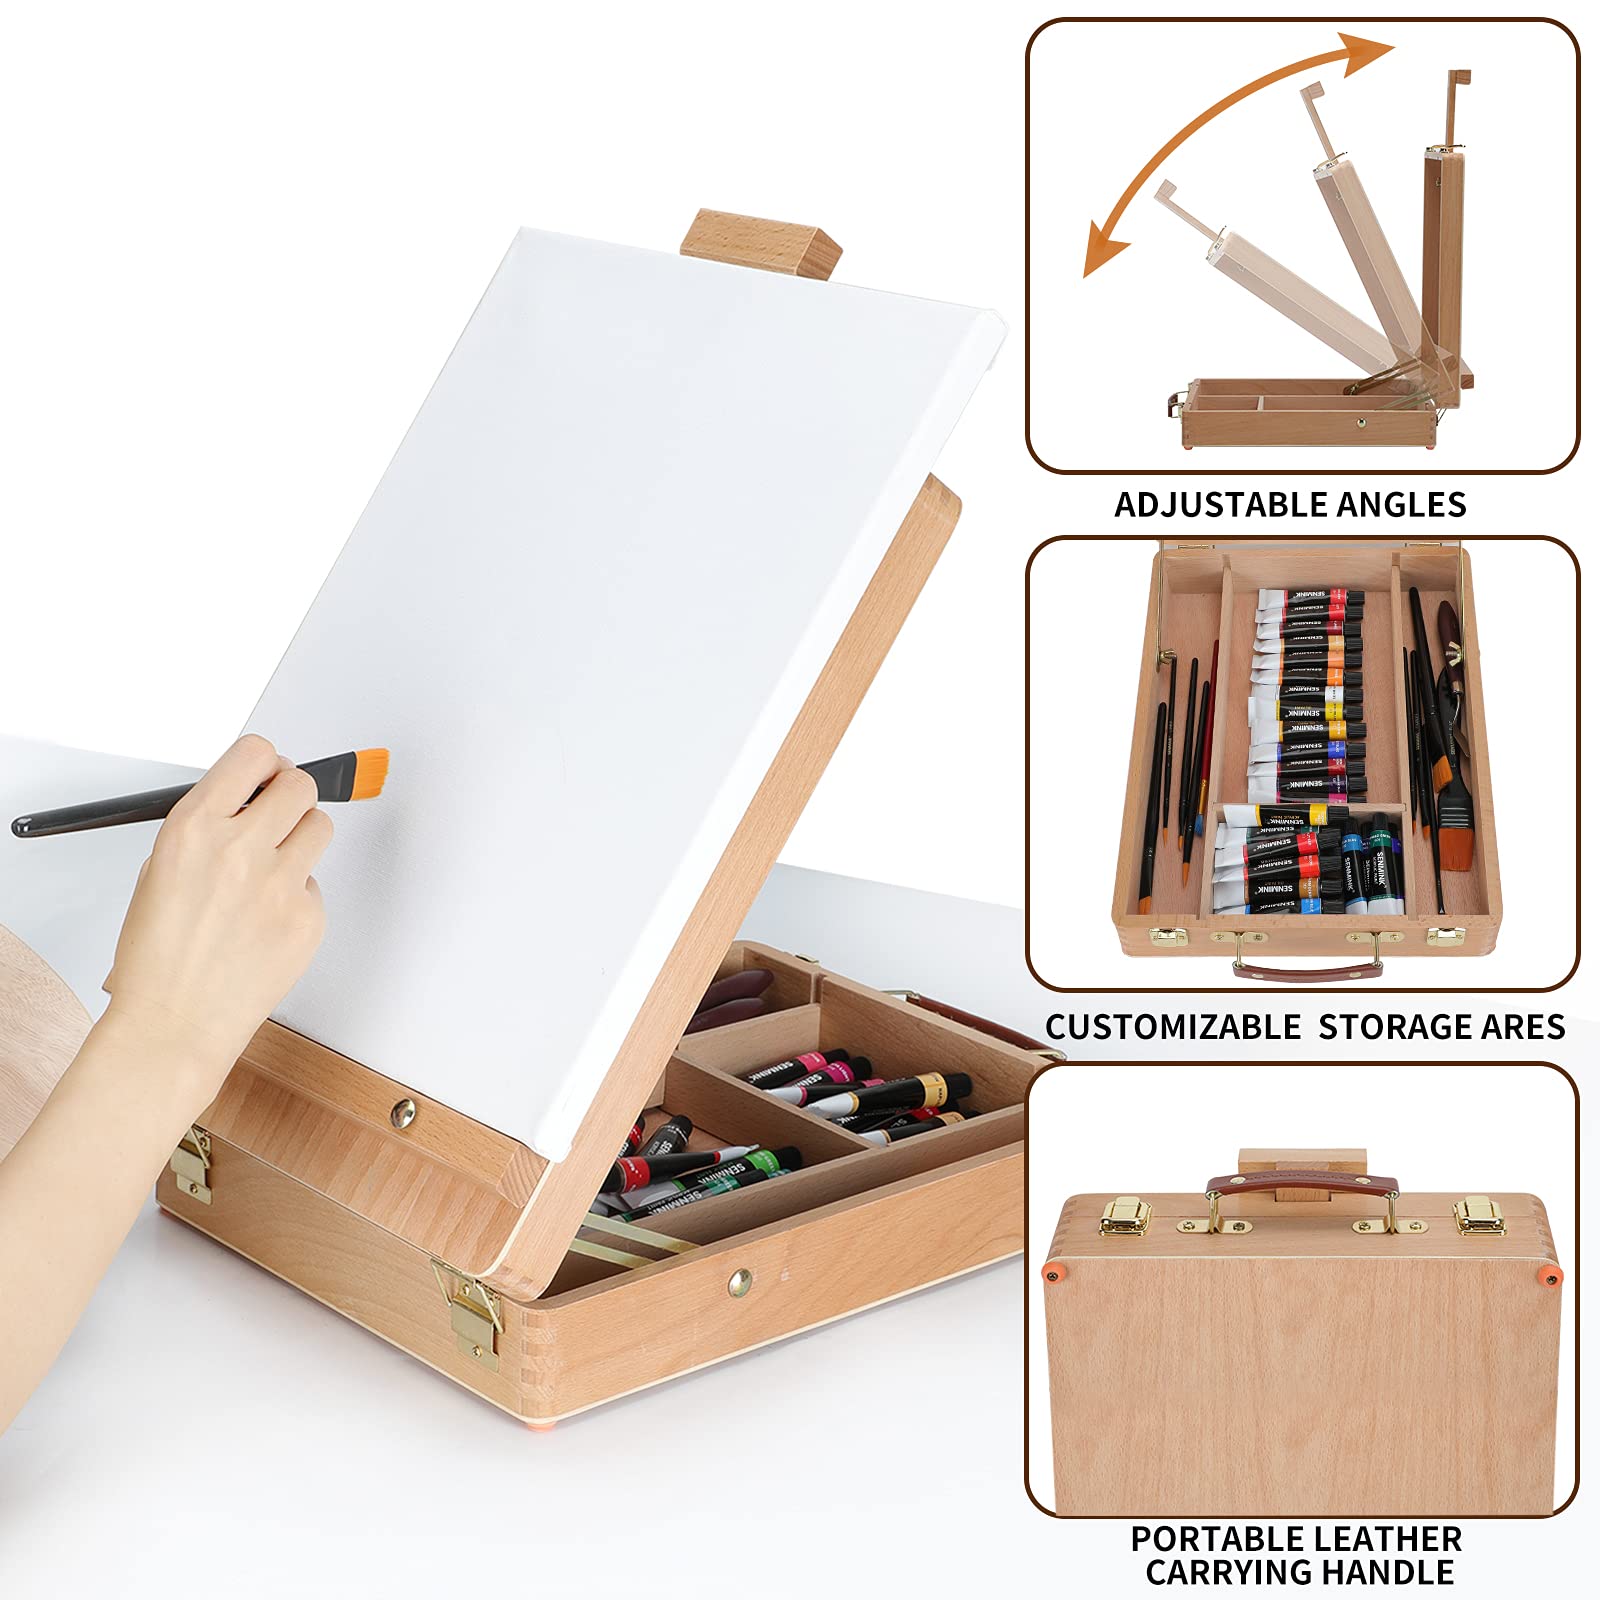 69 Pcs Artists Painting Set with Wood Box Easel，48×12ML Acrylic Painting Set, Canvas 9x12 inches, Wood Palette, Palette Knife Art Supplies, Paint Set for Adults Beginners